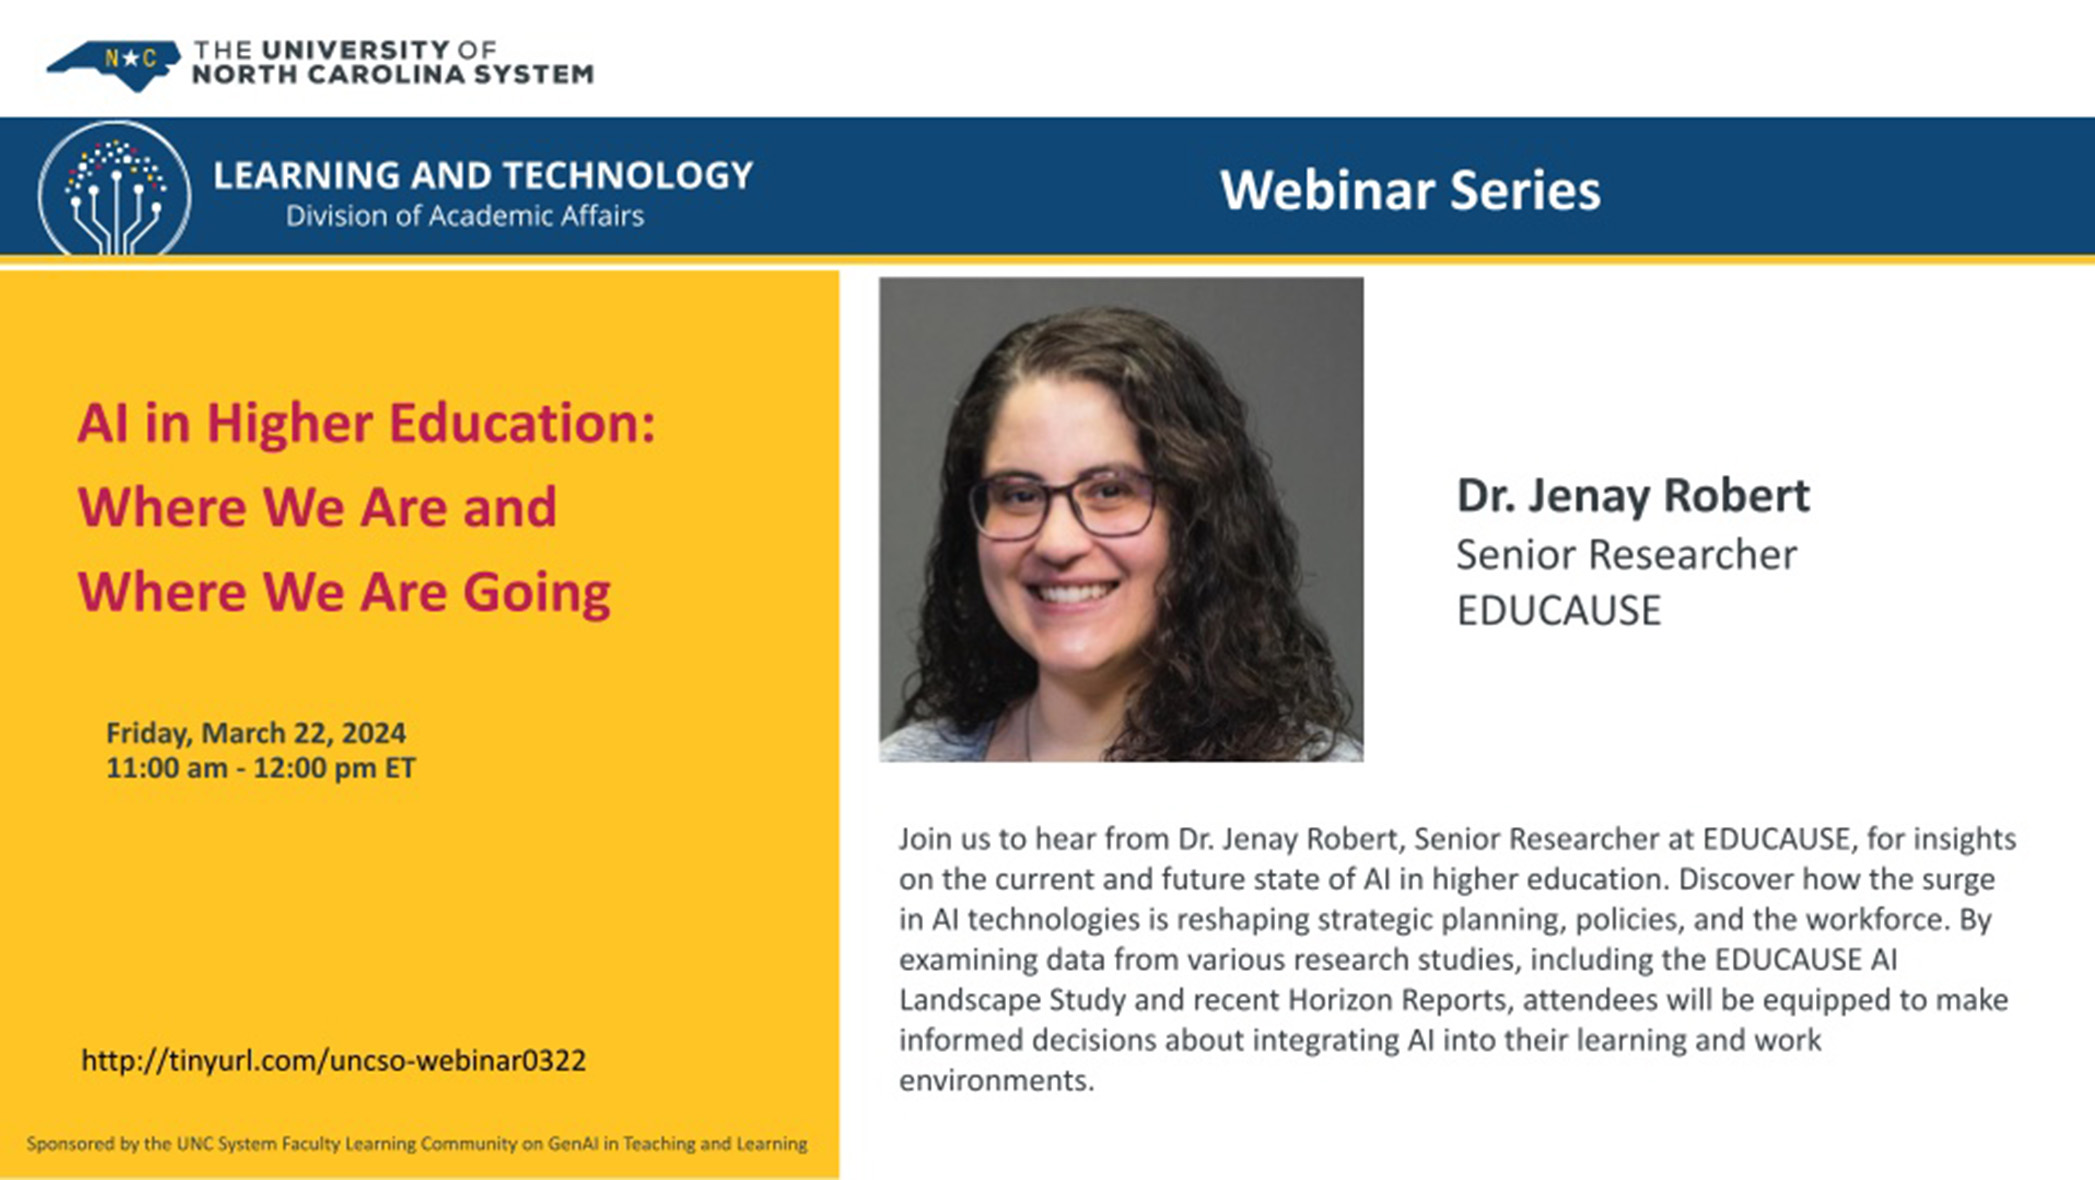 Poster with a picture of Dr. Jenay Robert promotes a webinar on AI in higher education.